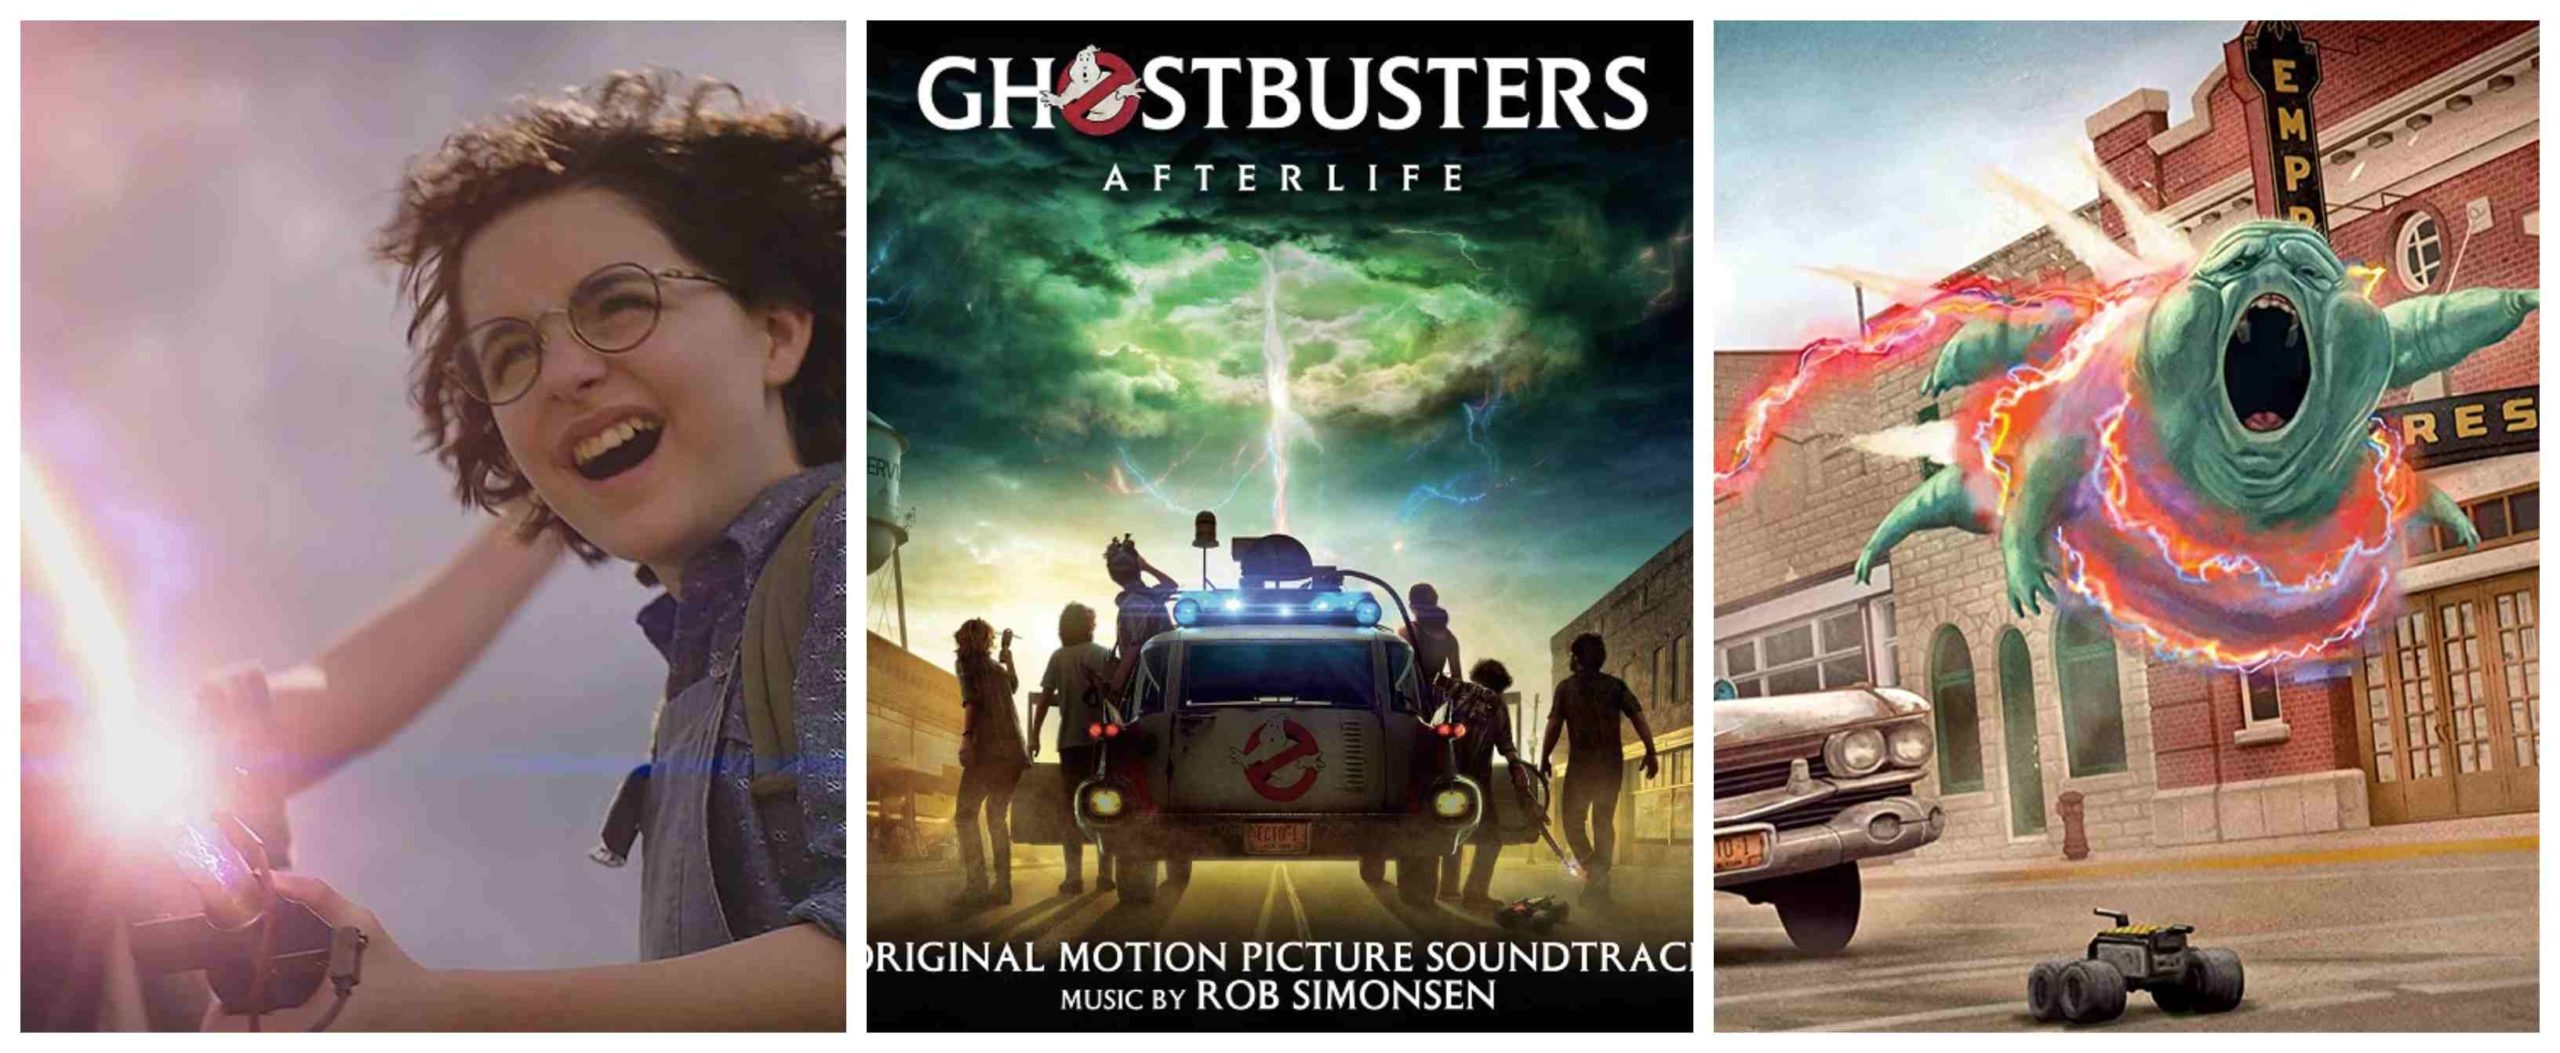 Ghostbusters Afterlife banner